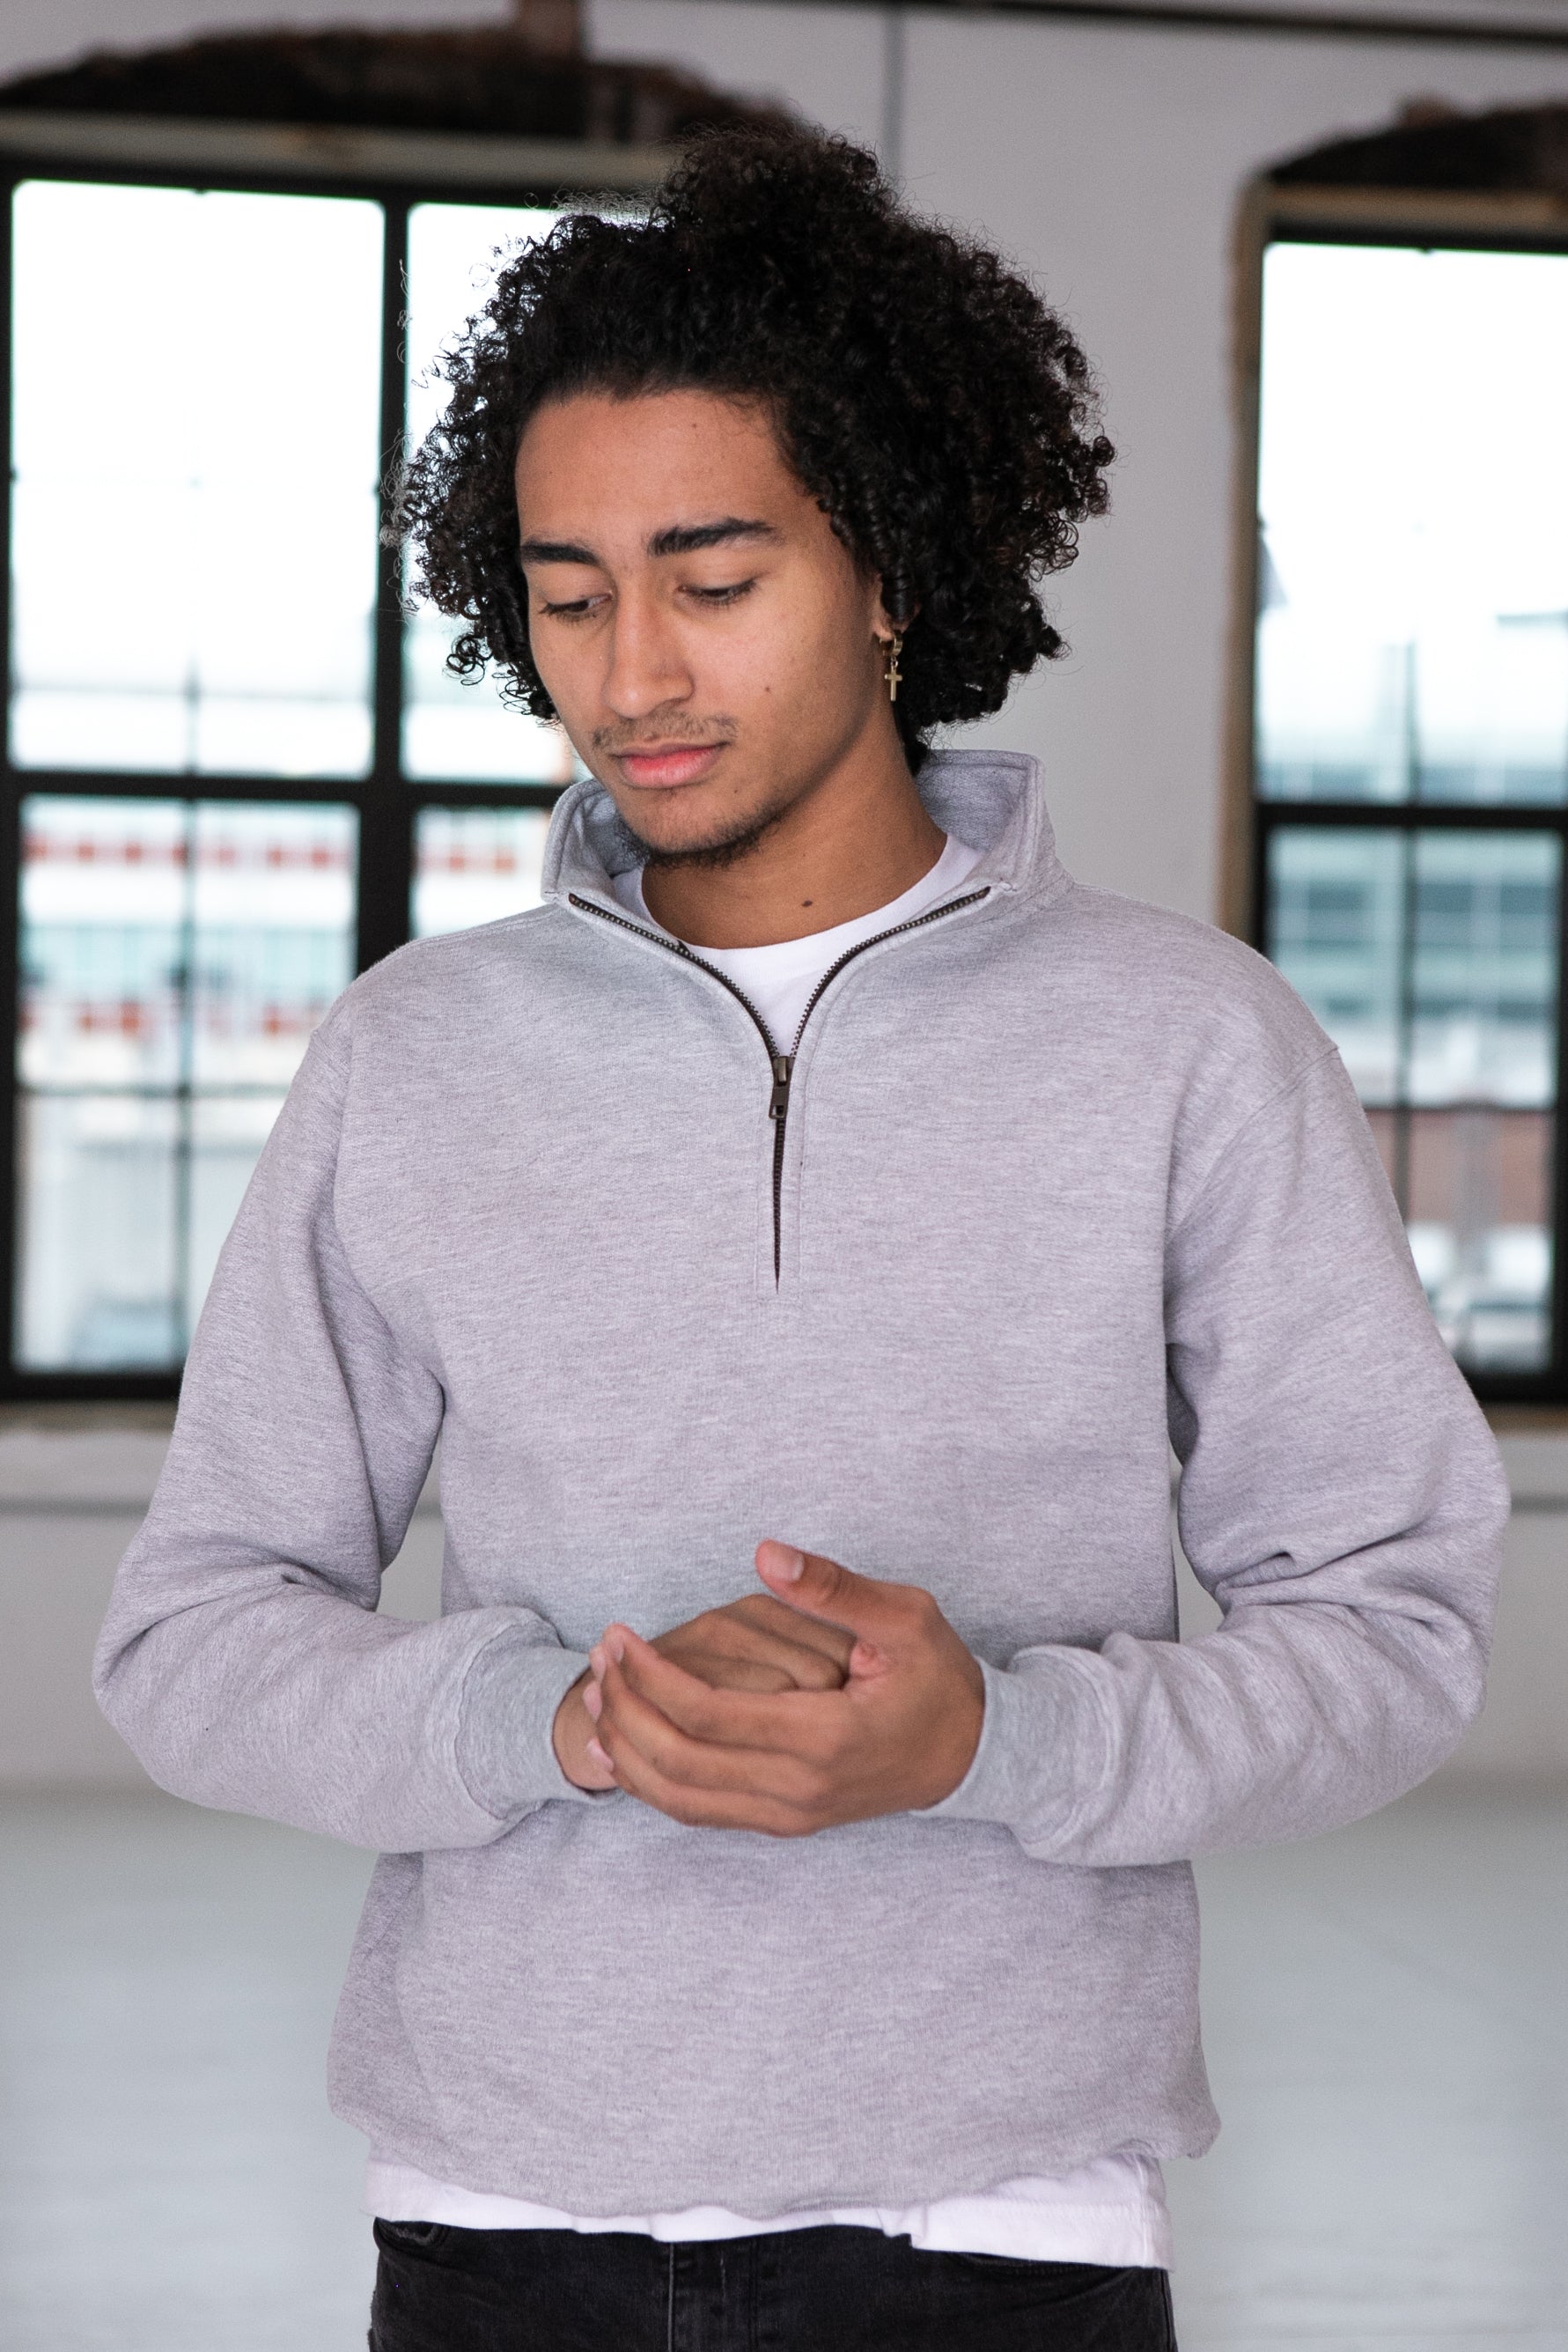 Stay cozy in style with this men's grey long sleeve quarter zip pullover. Customize your gift with this wardrobe essential at Me To You Box's Build Your Own Gift Box option.